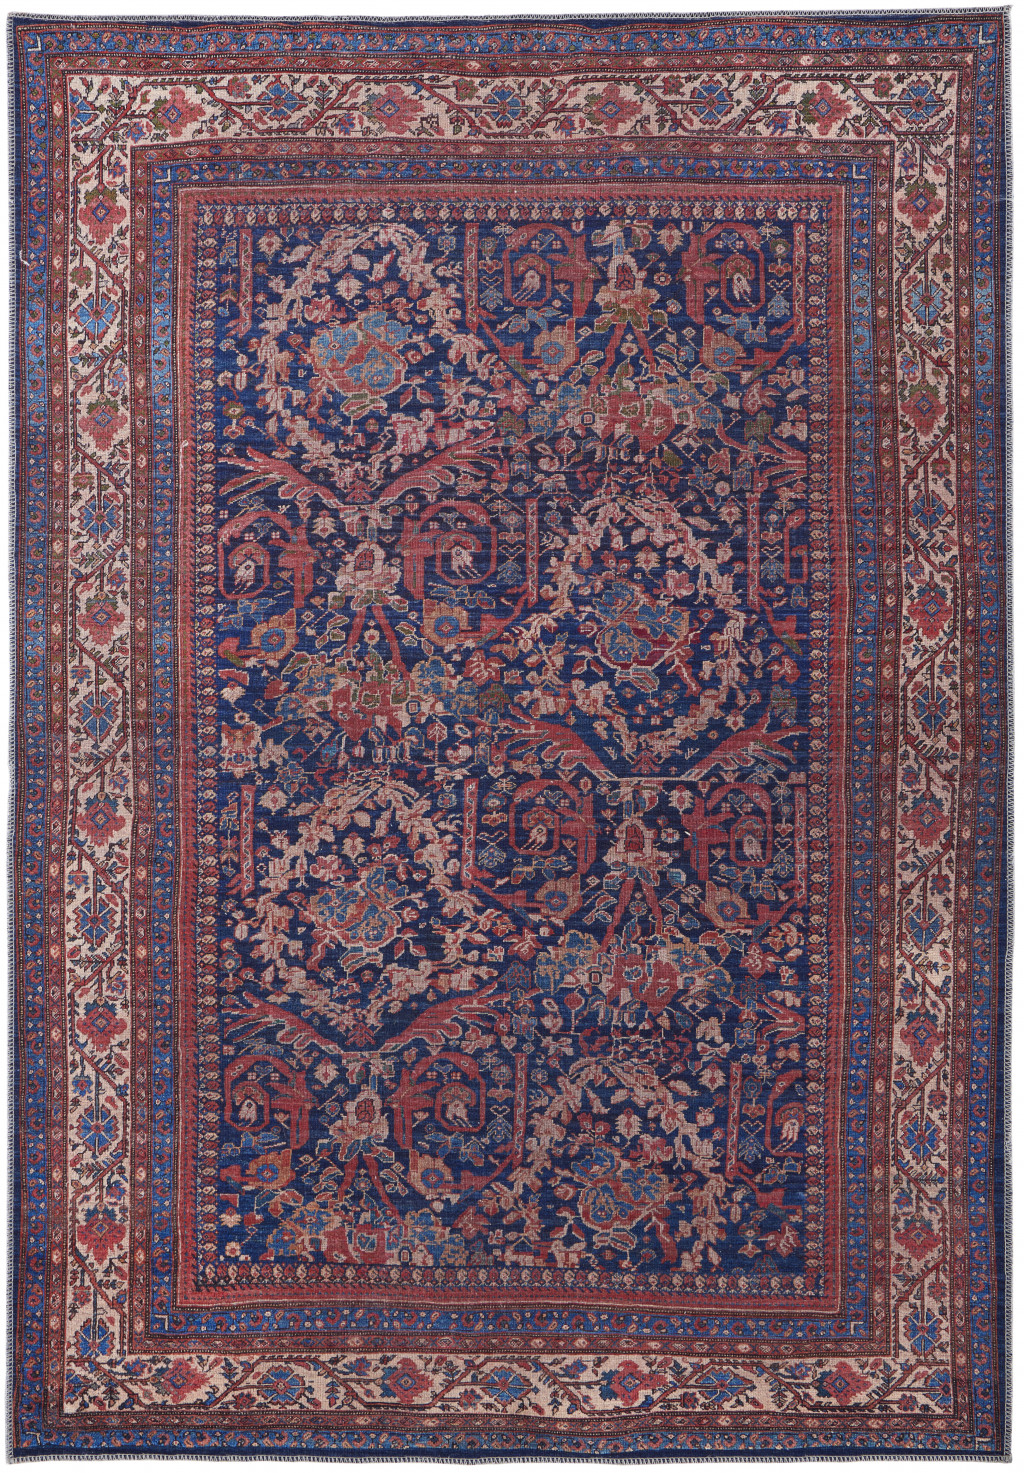 5' X 8' Red Blue And Tan Floral Power Loom Area Rug-515106-1